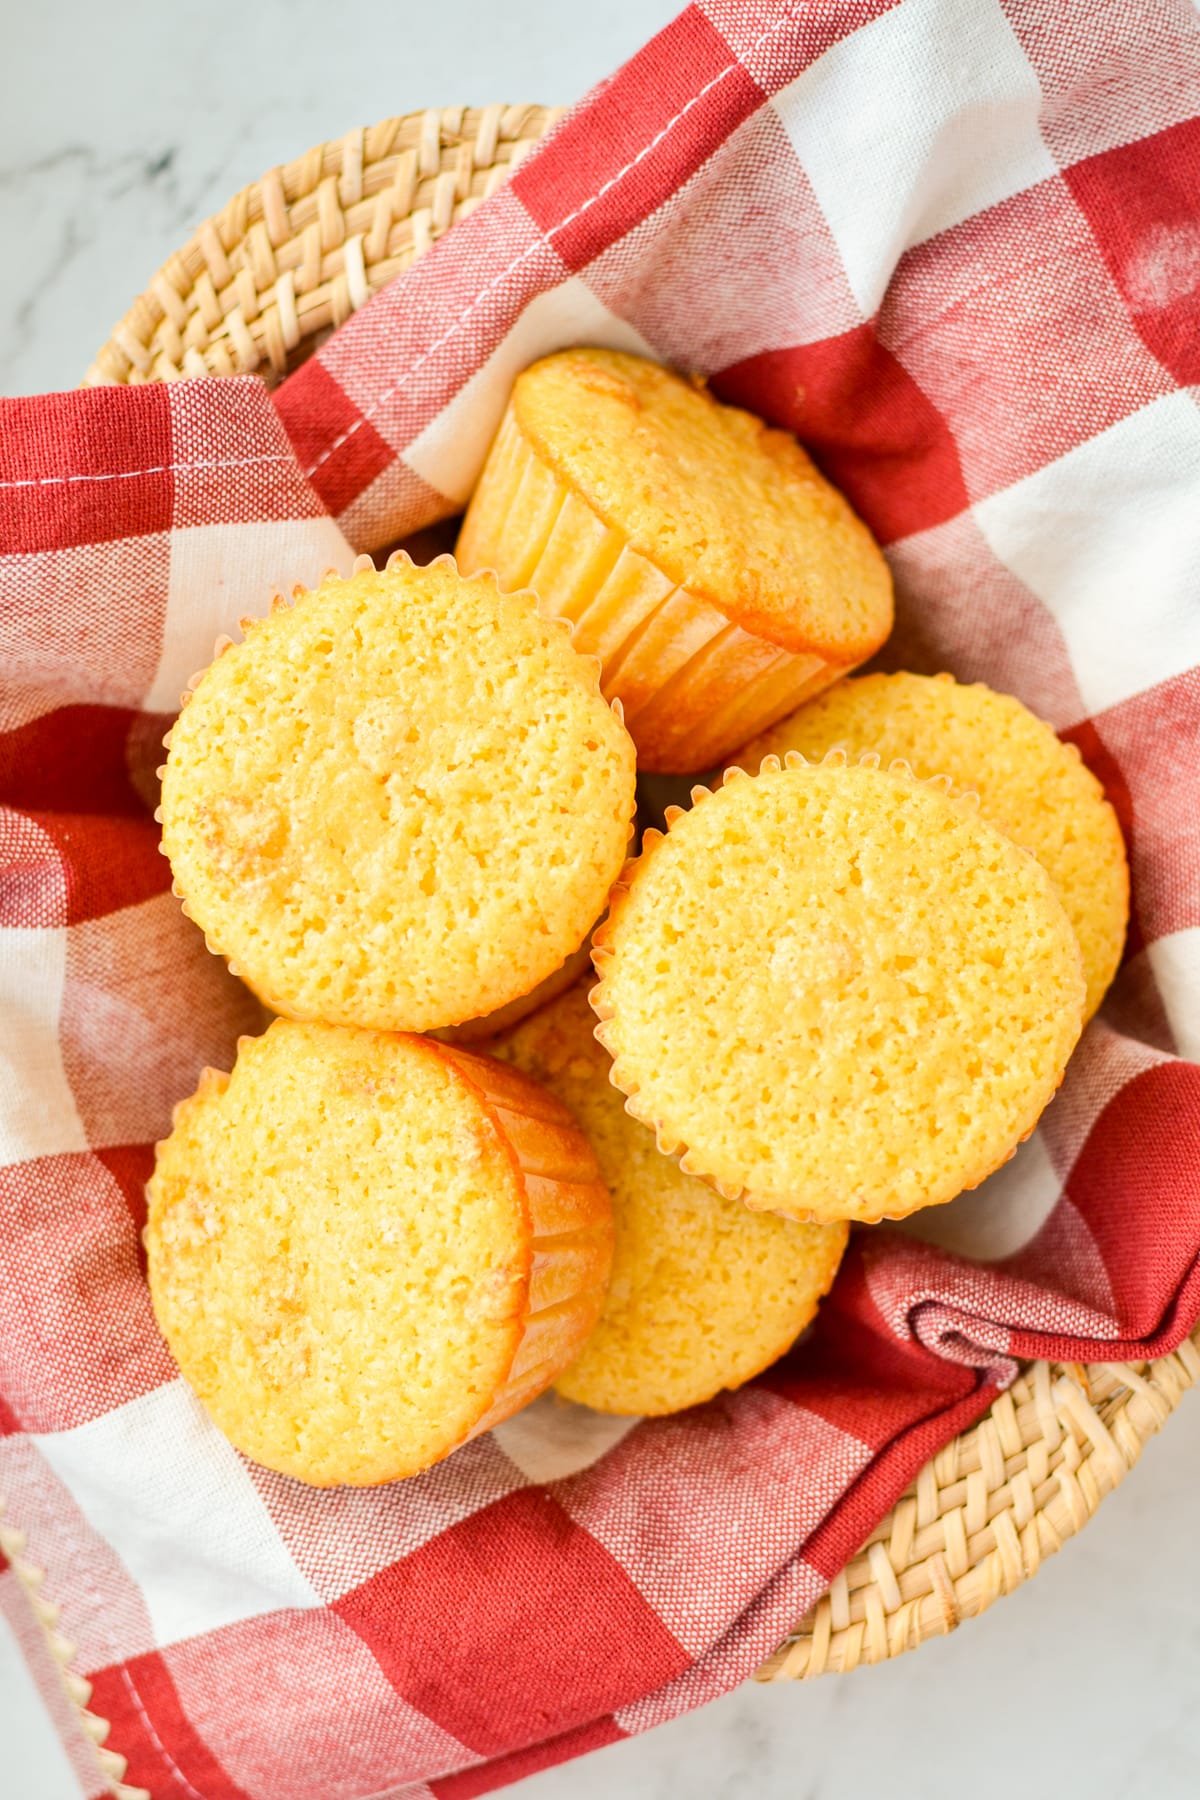 Corn muffins laying inside of a red check napkin-lined bowl.